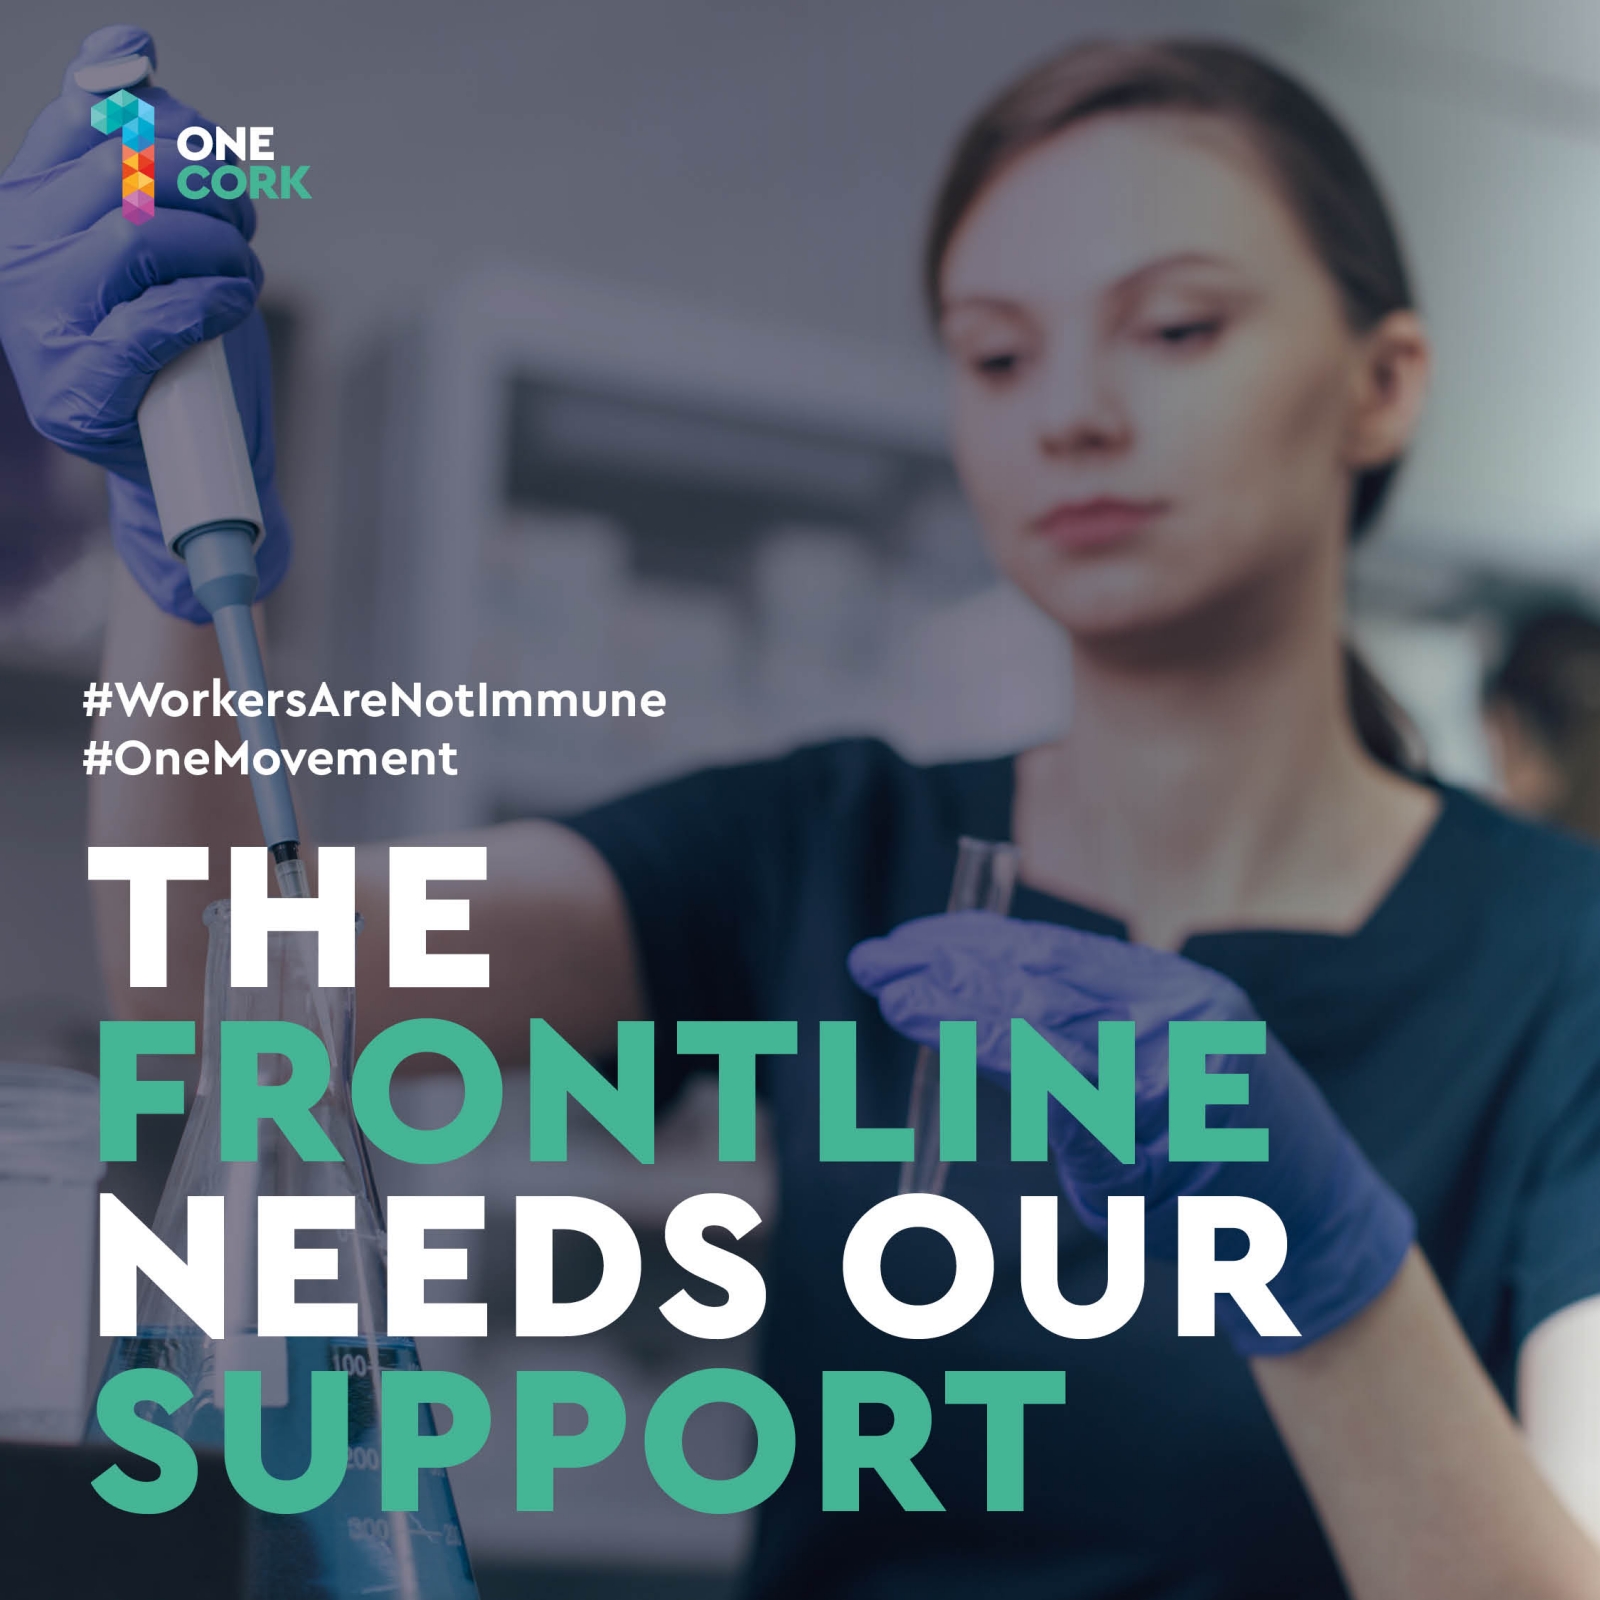 The frontline needs our support